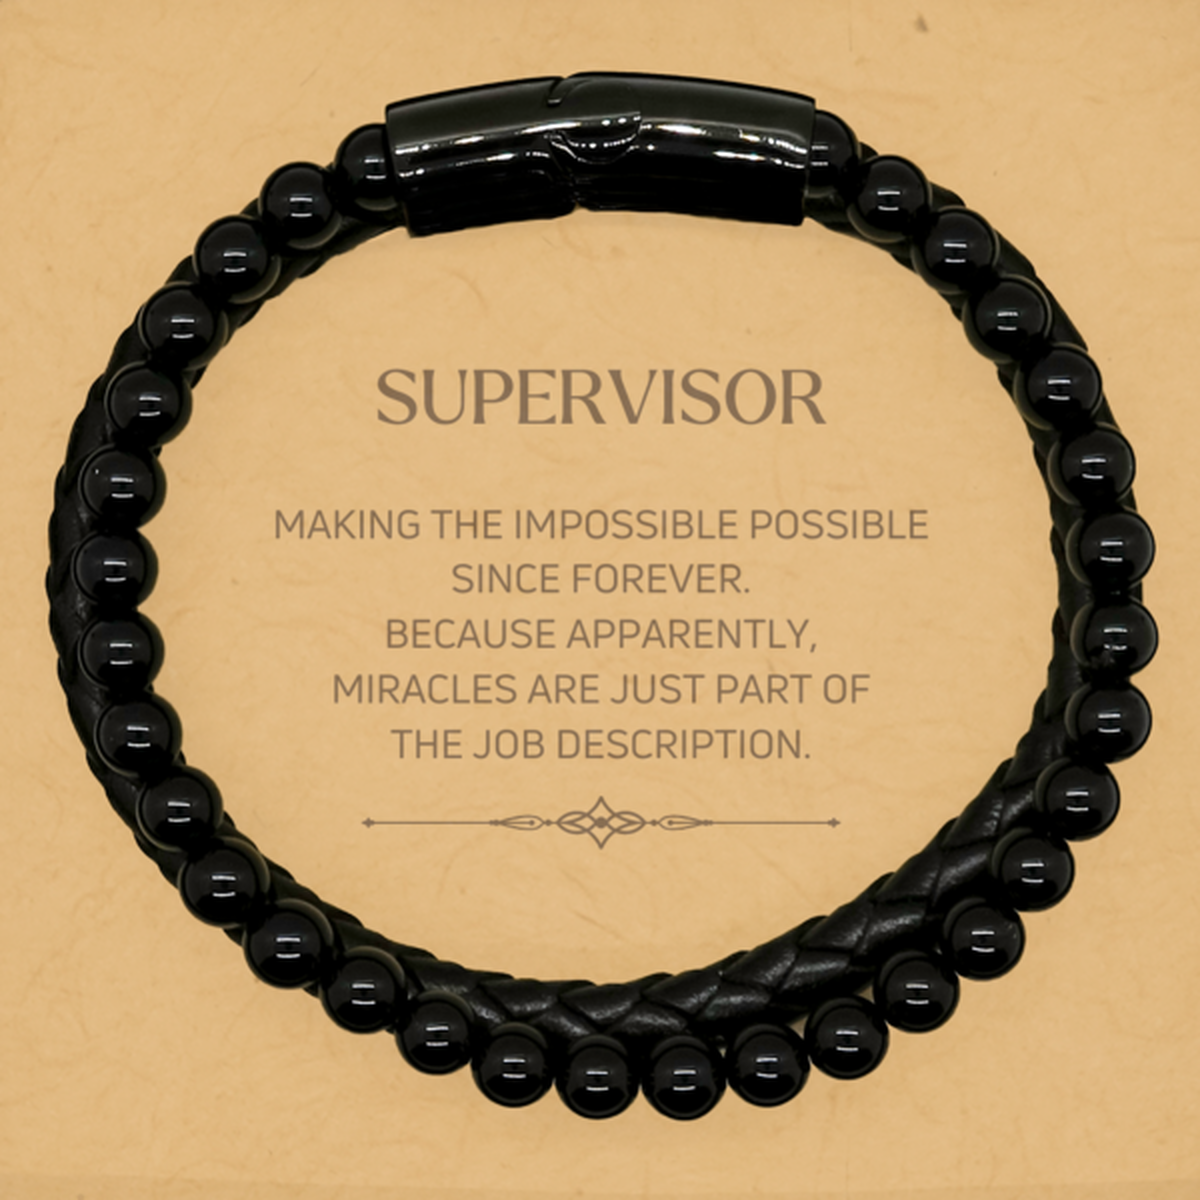 Funny Supervisor Gifts, Miracles are just part of the job description, Inspirational Birthday Stone Leather Bracelets For Supervisor, Men, Women, Coworkers, Friends, Boss